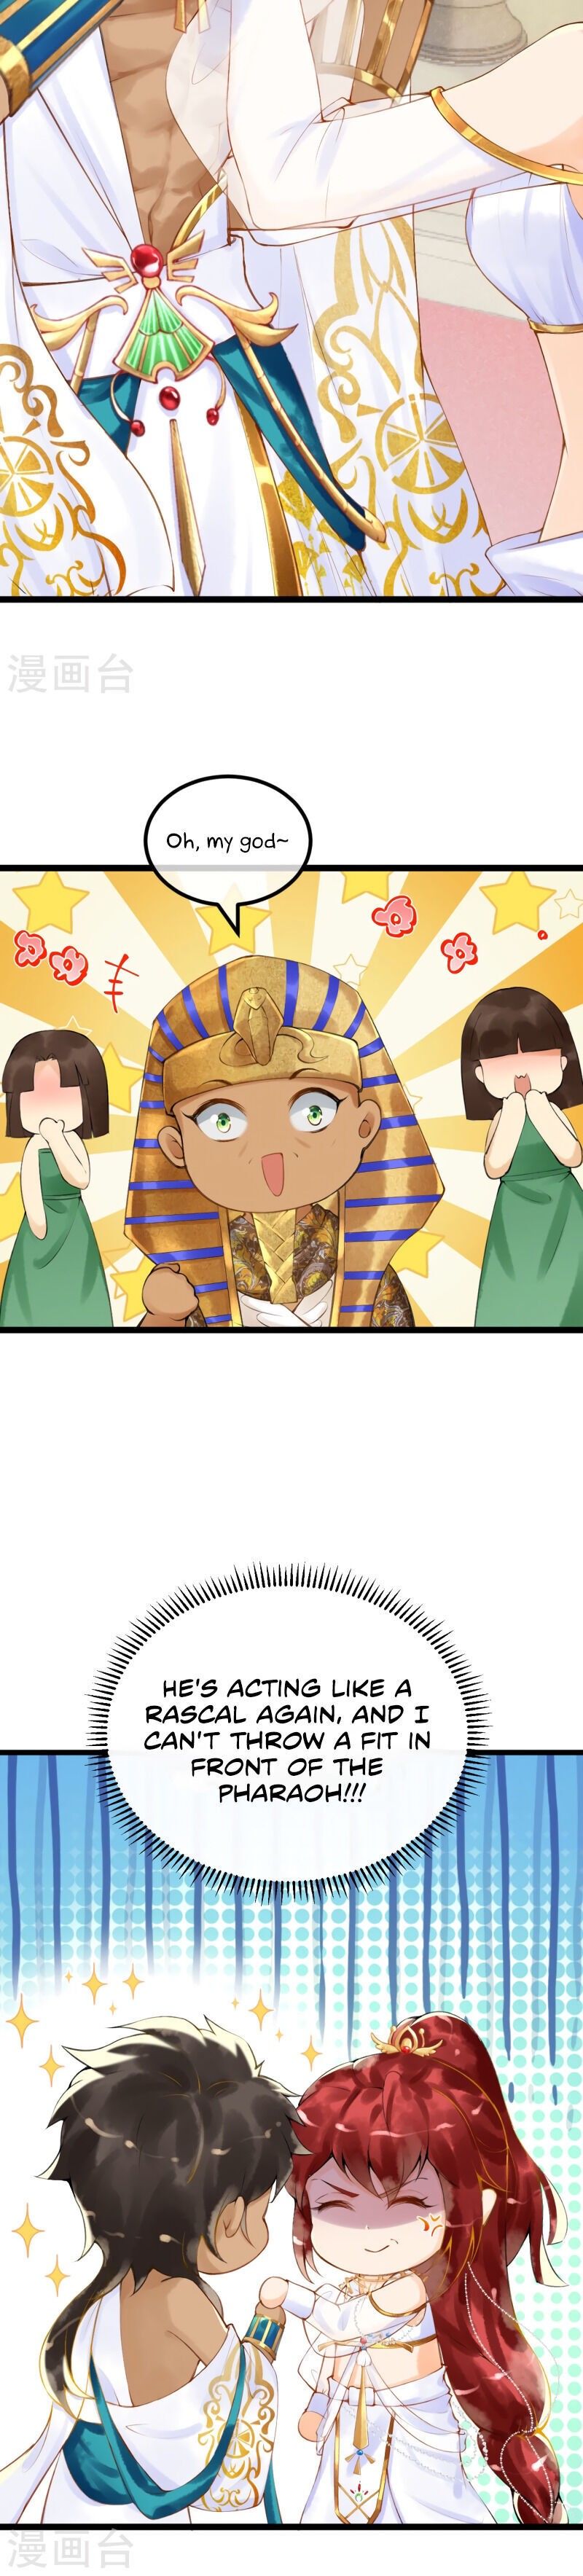 Crossing Egypt: Becoming The Pharaoh’s Bride chapter 3